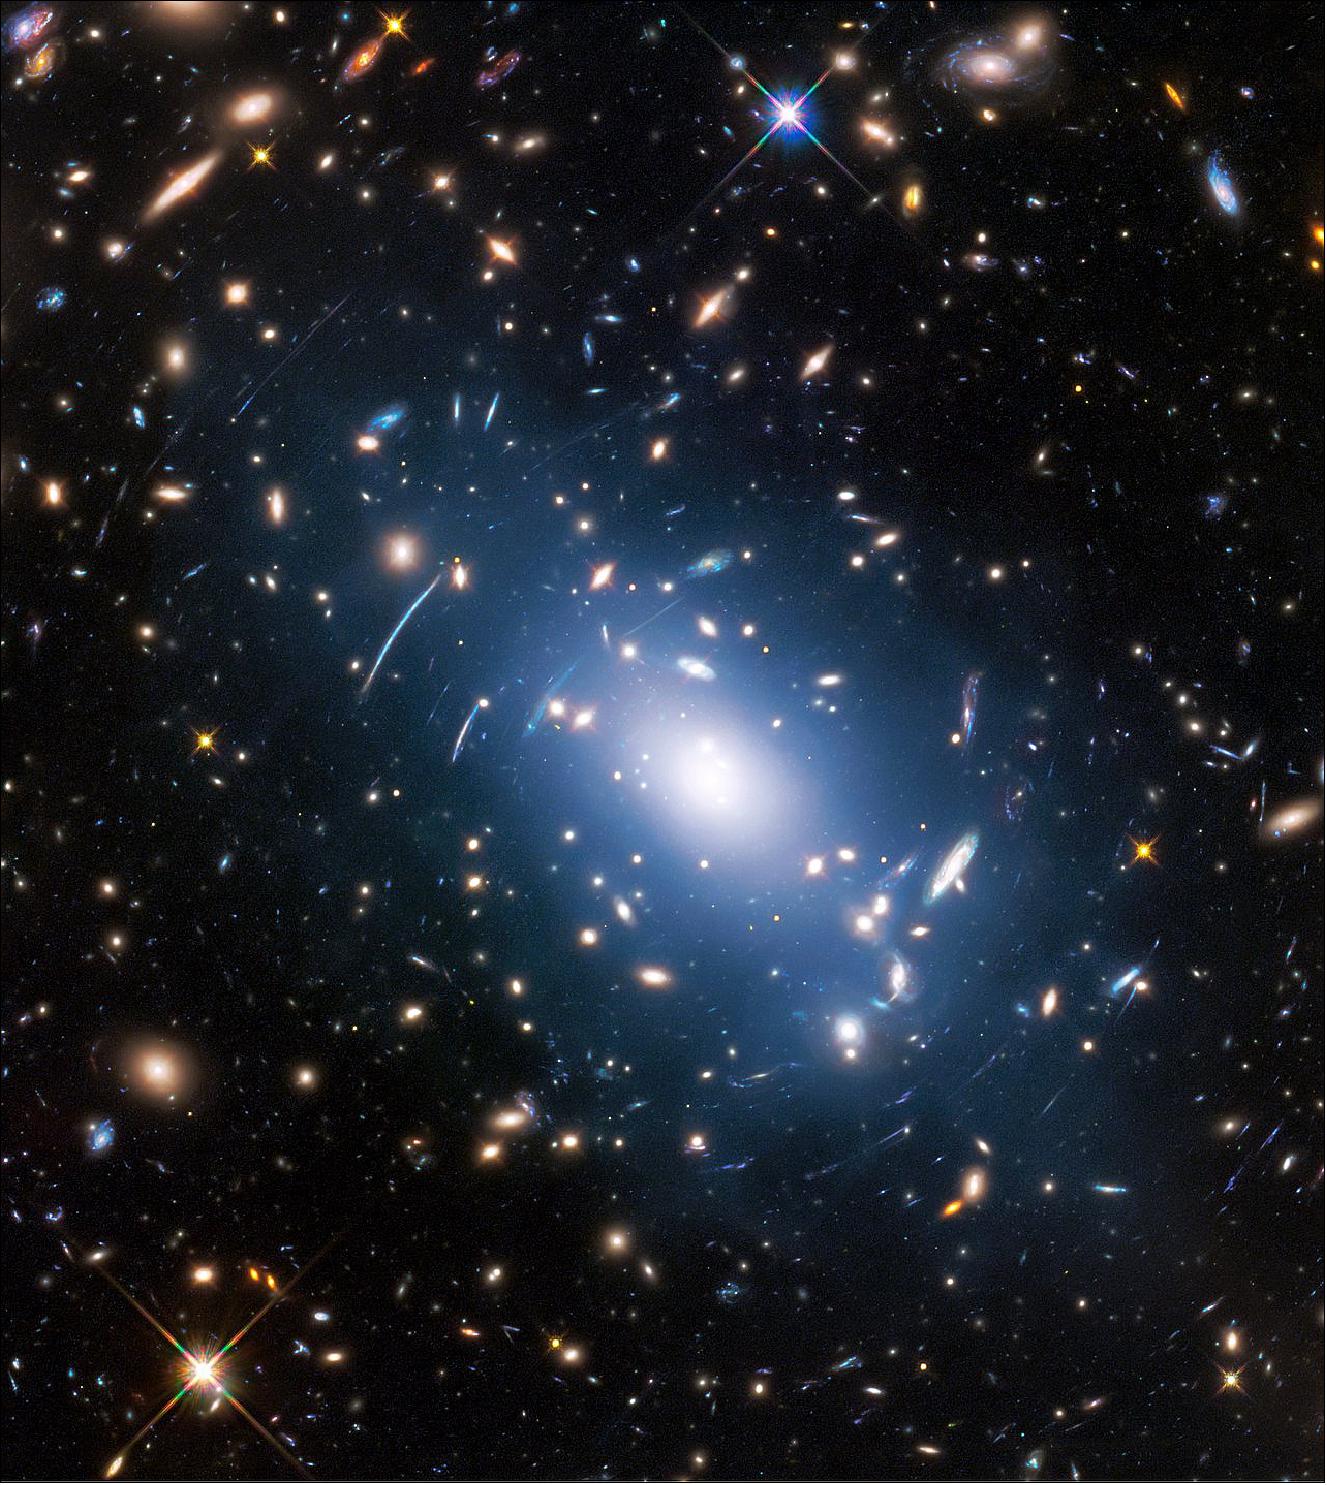 Figure 2: Abell S1063, a galaxy cluster, was observed by the NASA/ESA Hubble Space Telescope as part of the Frontier Fields program. The huge mass of the cluster – containing both baryonic matter and dark matter – acts as cosmic magnification glass and deforms objects behind it. In the past astronomers used this gravitational lensing effect to calculate the distribution of dark matter in galaxy clusters (image credit: NASA, ESA, and M. Montes (University of New South Wales, Sydney, Australia)